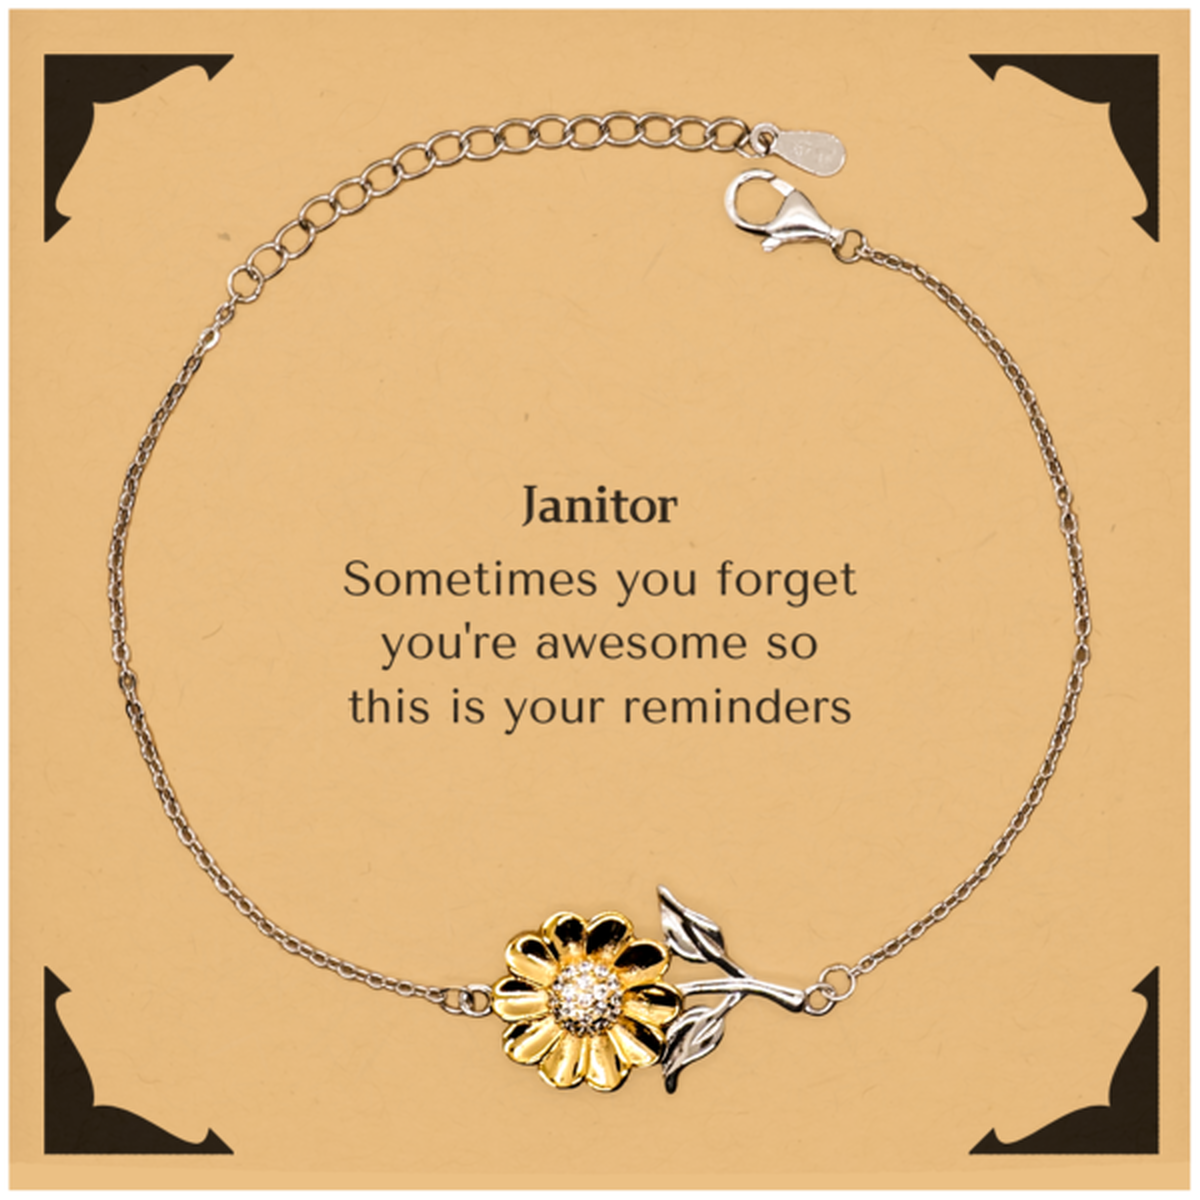 Sentimental Janitor Sunflower Bracelet, Janitor Sometimes you forget you're awesome so this is your reminders, Graduation Christmas Birthday Gifts for Janitor, Men, Women, Coworkers